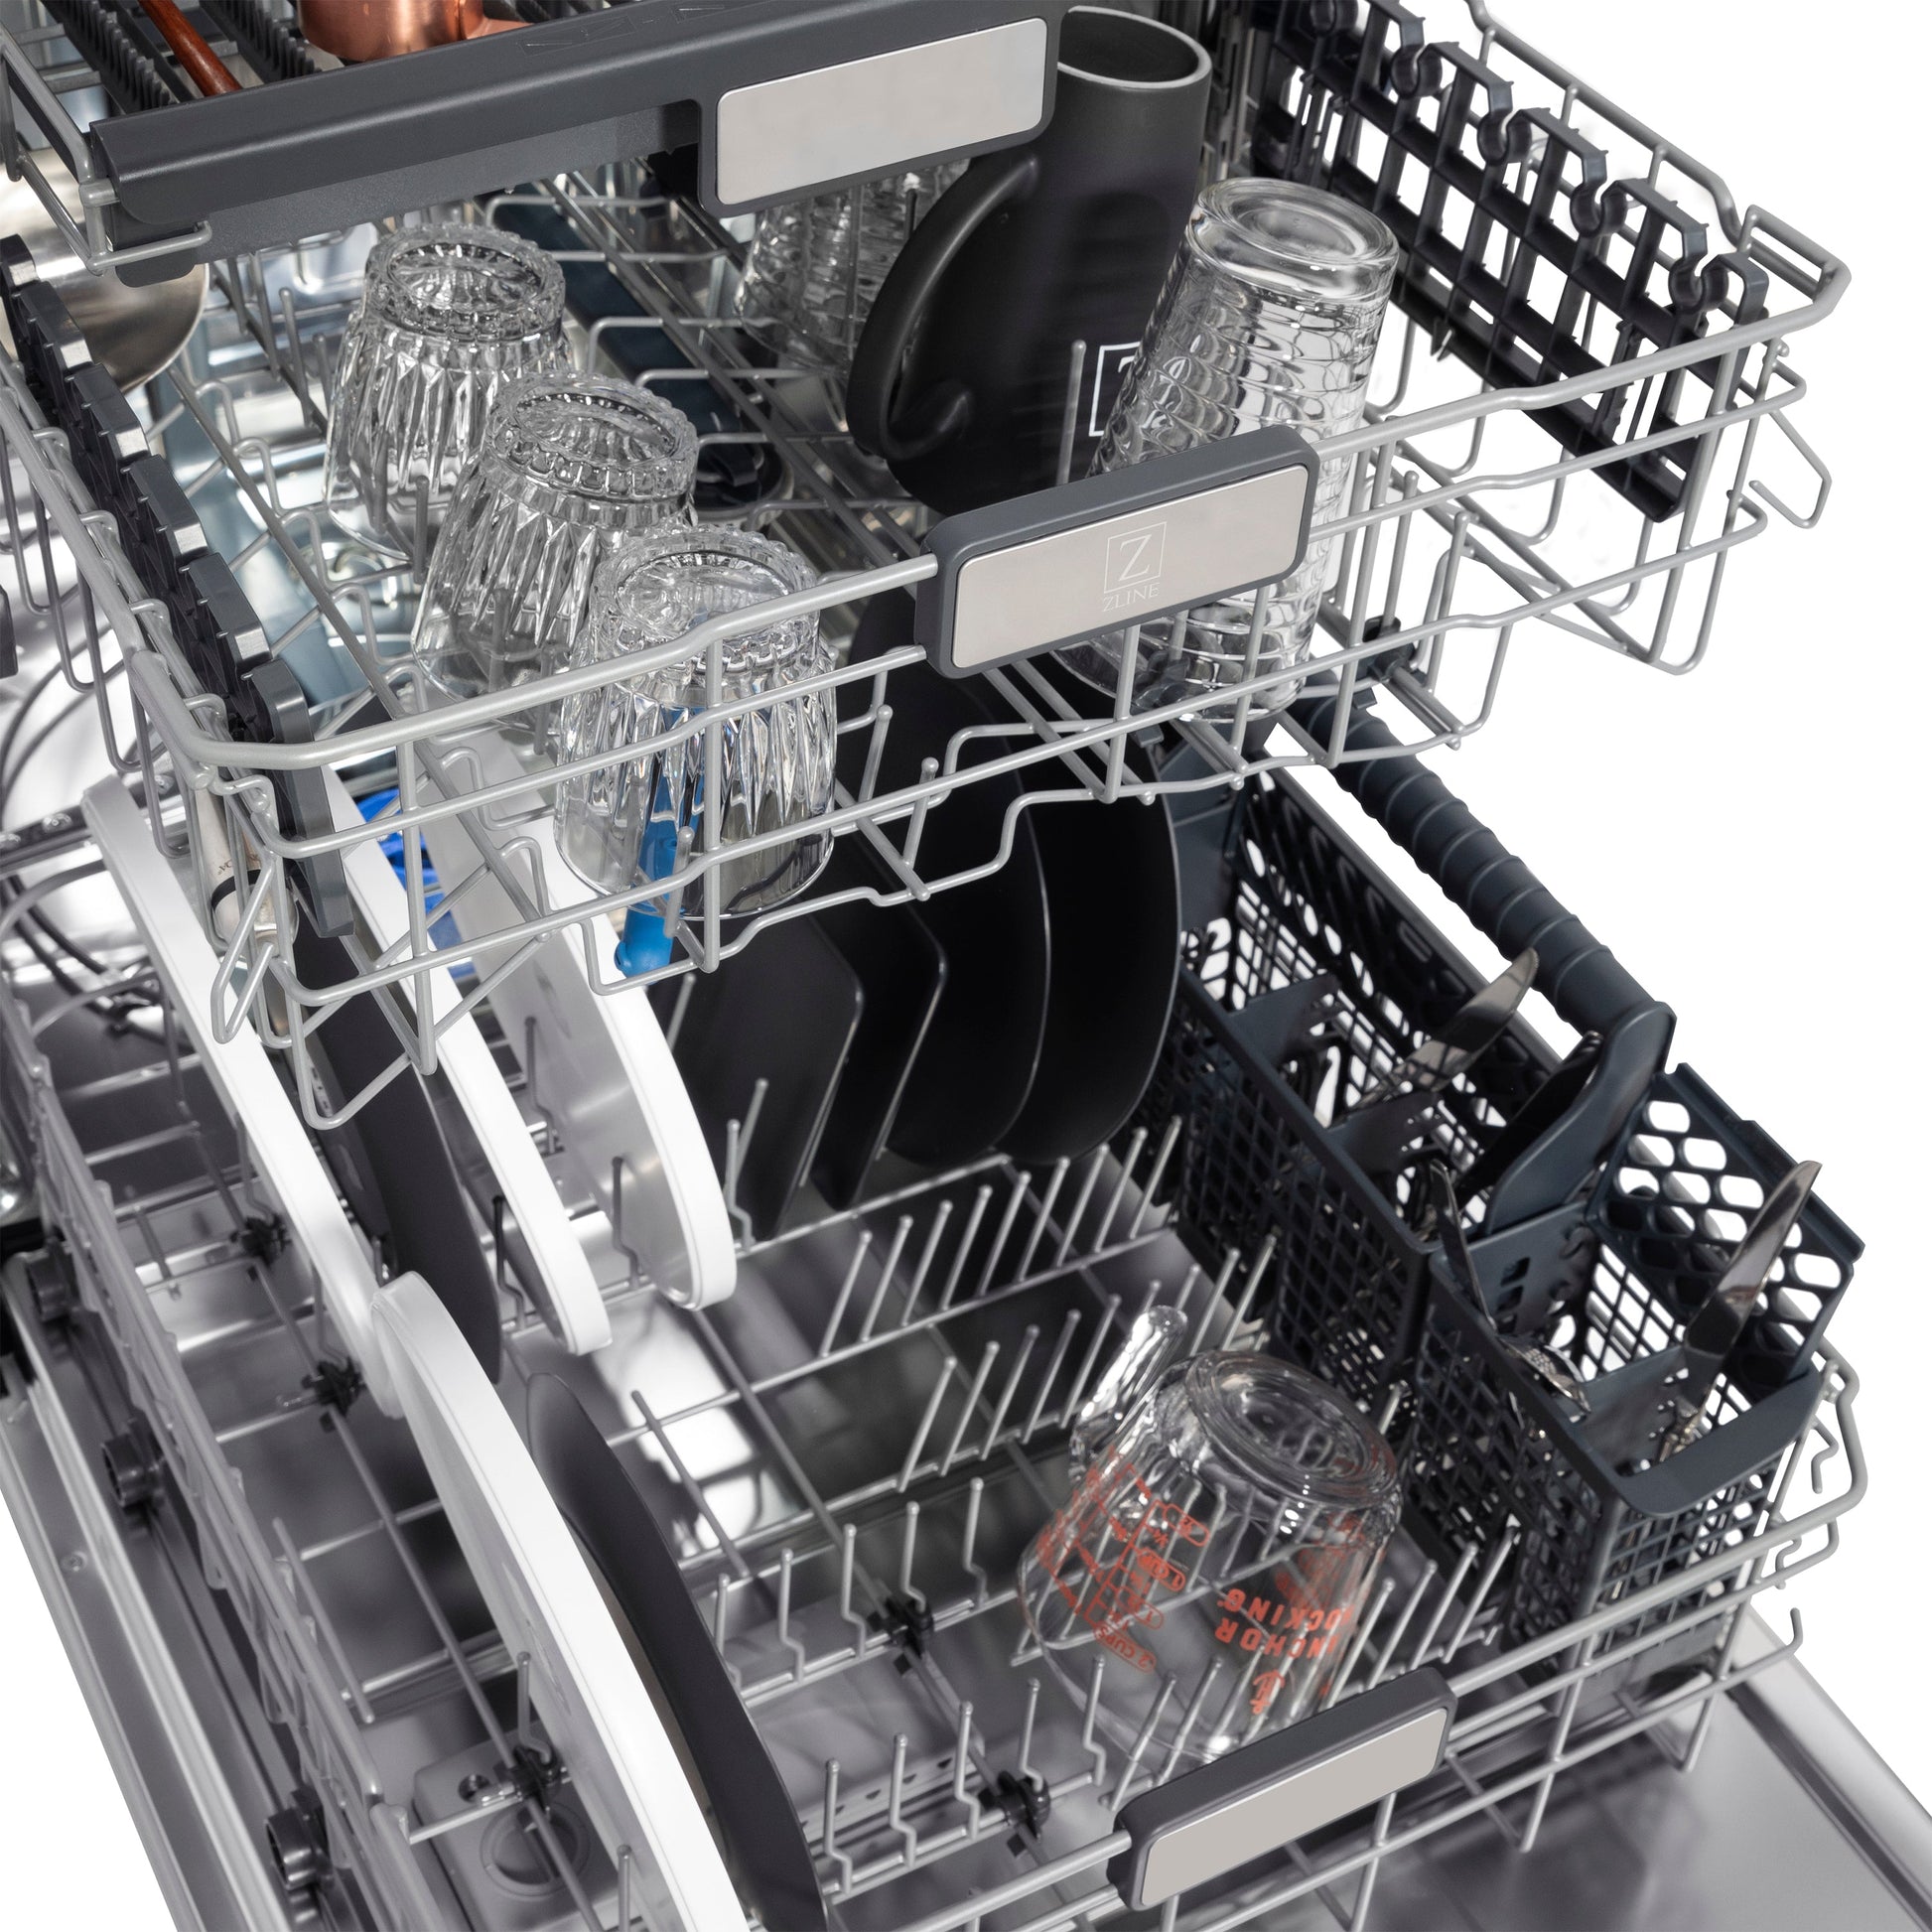 ZLINE Autograph Edition 24" 3rd Rack Top Touch Control Tall Tub Dishwasher - Black Stainless Steel with Accented Handle